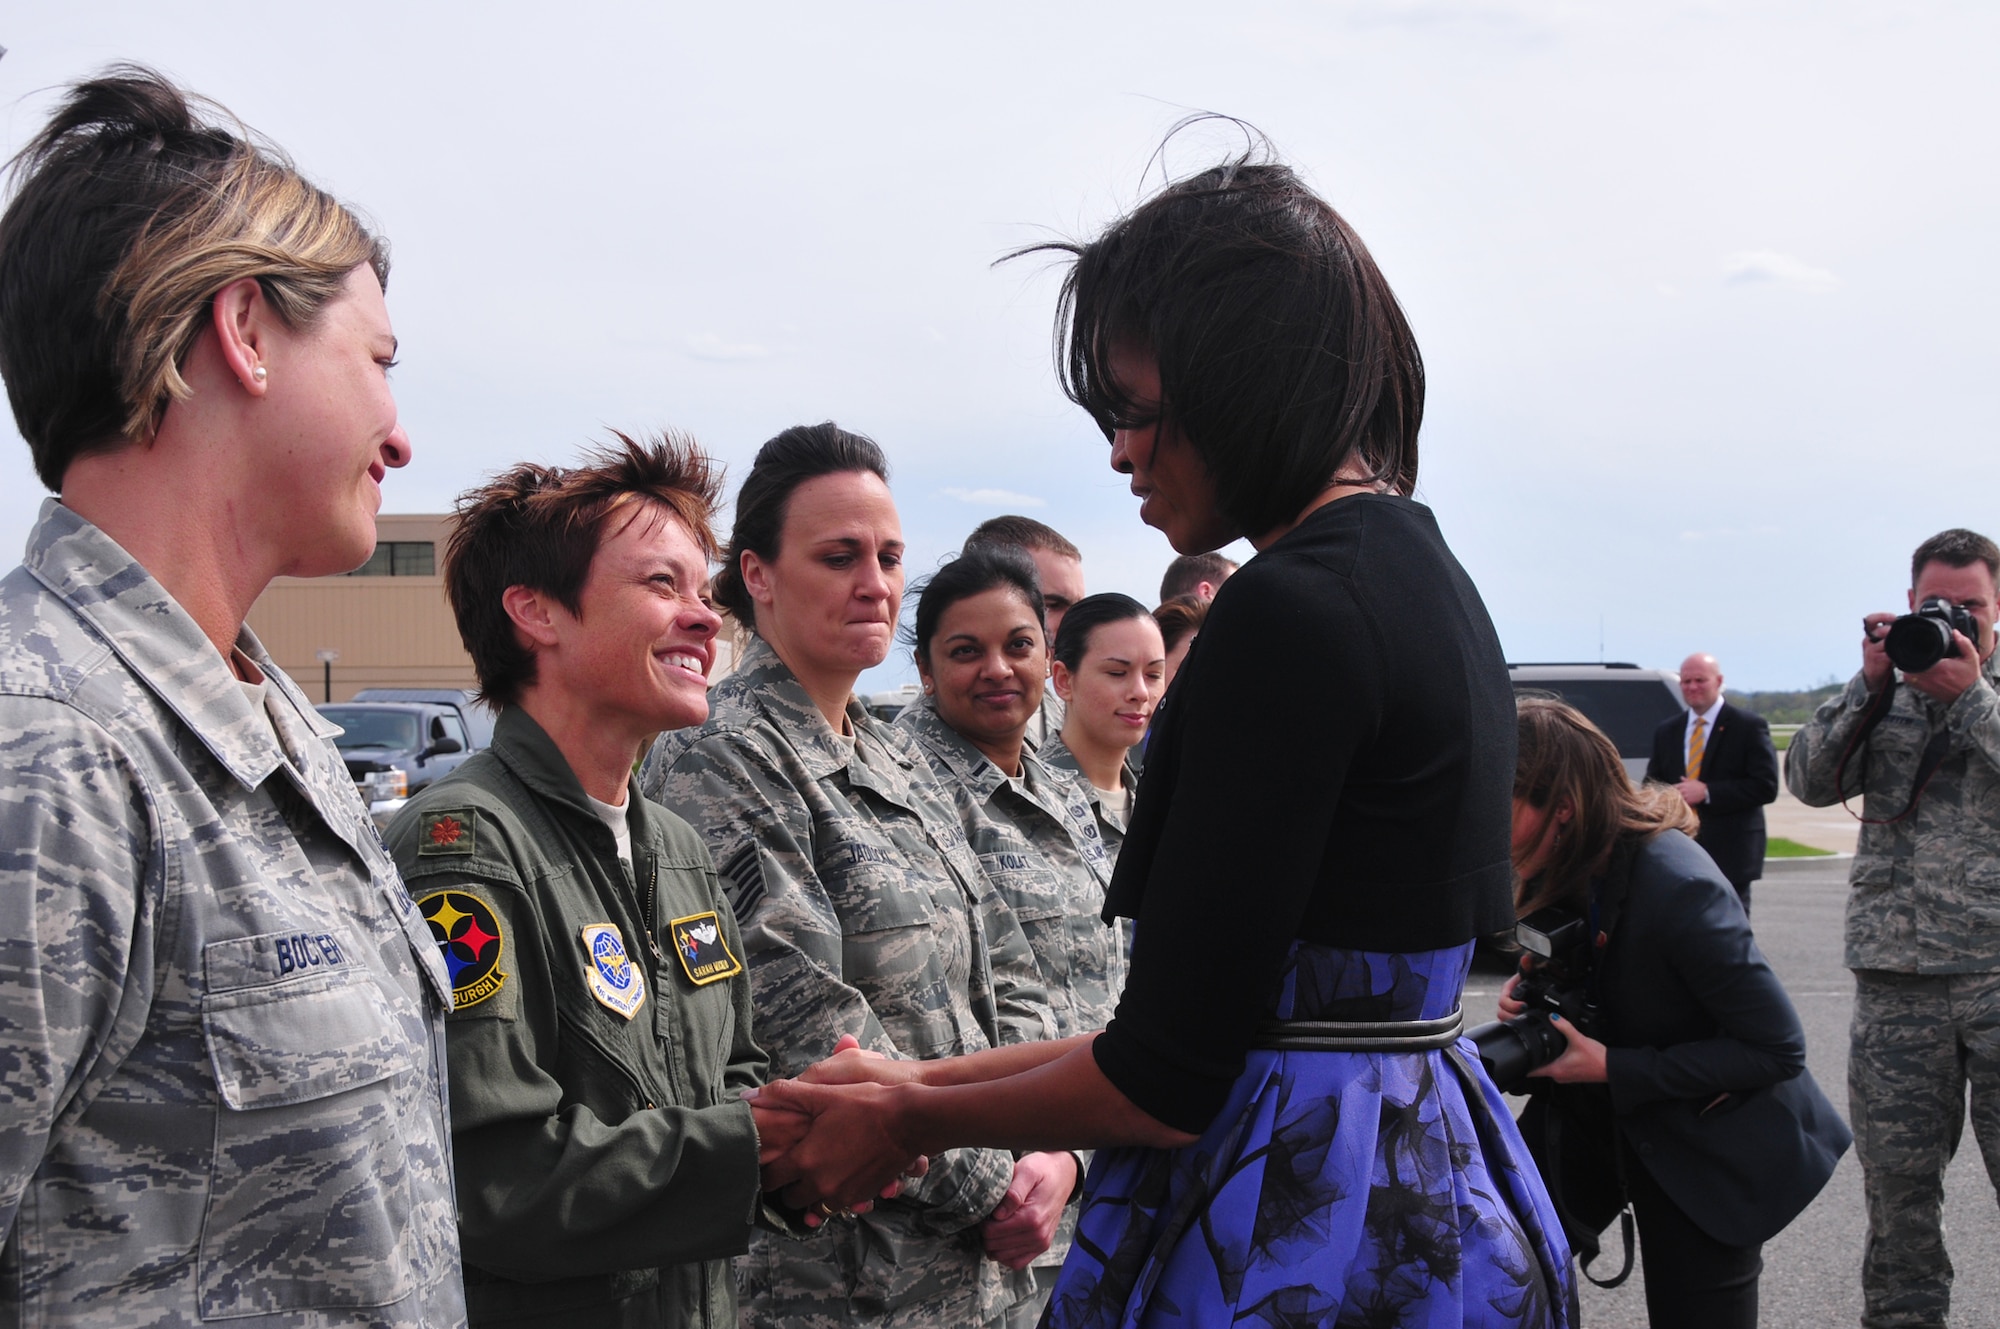 First Lady, Michelle Obama, is greeted by service members and family members from the 171st Air Refueling Wing and the 911th Airlift Wing upon her arrival to the Pittsburgh International Airport, April 17. (National Guard photo by Master Sgt. Ann Young/Released by Capt. Dicie Hritz)